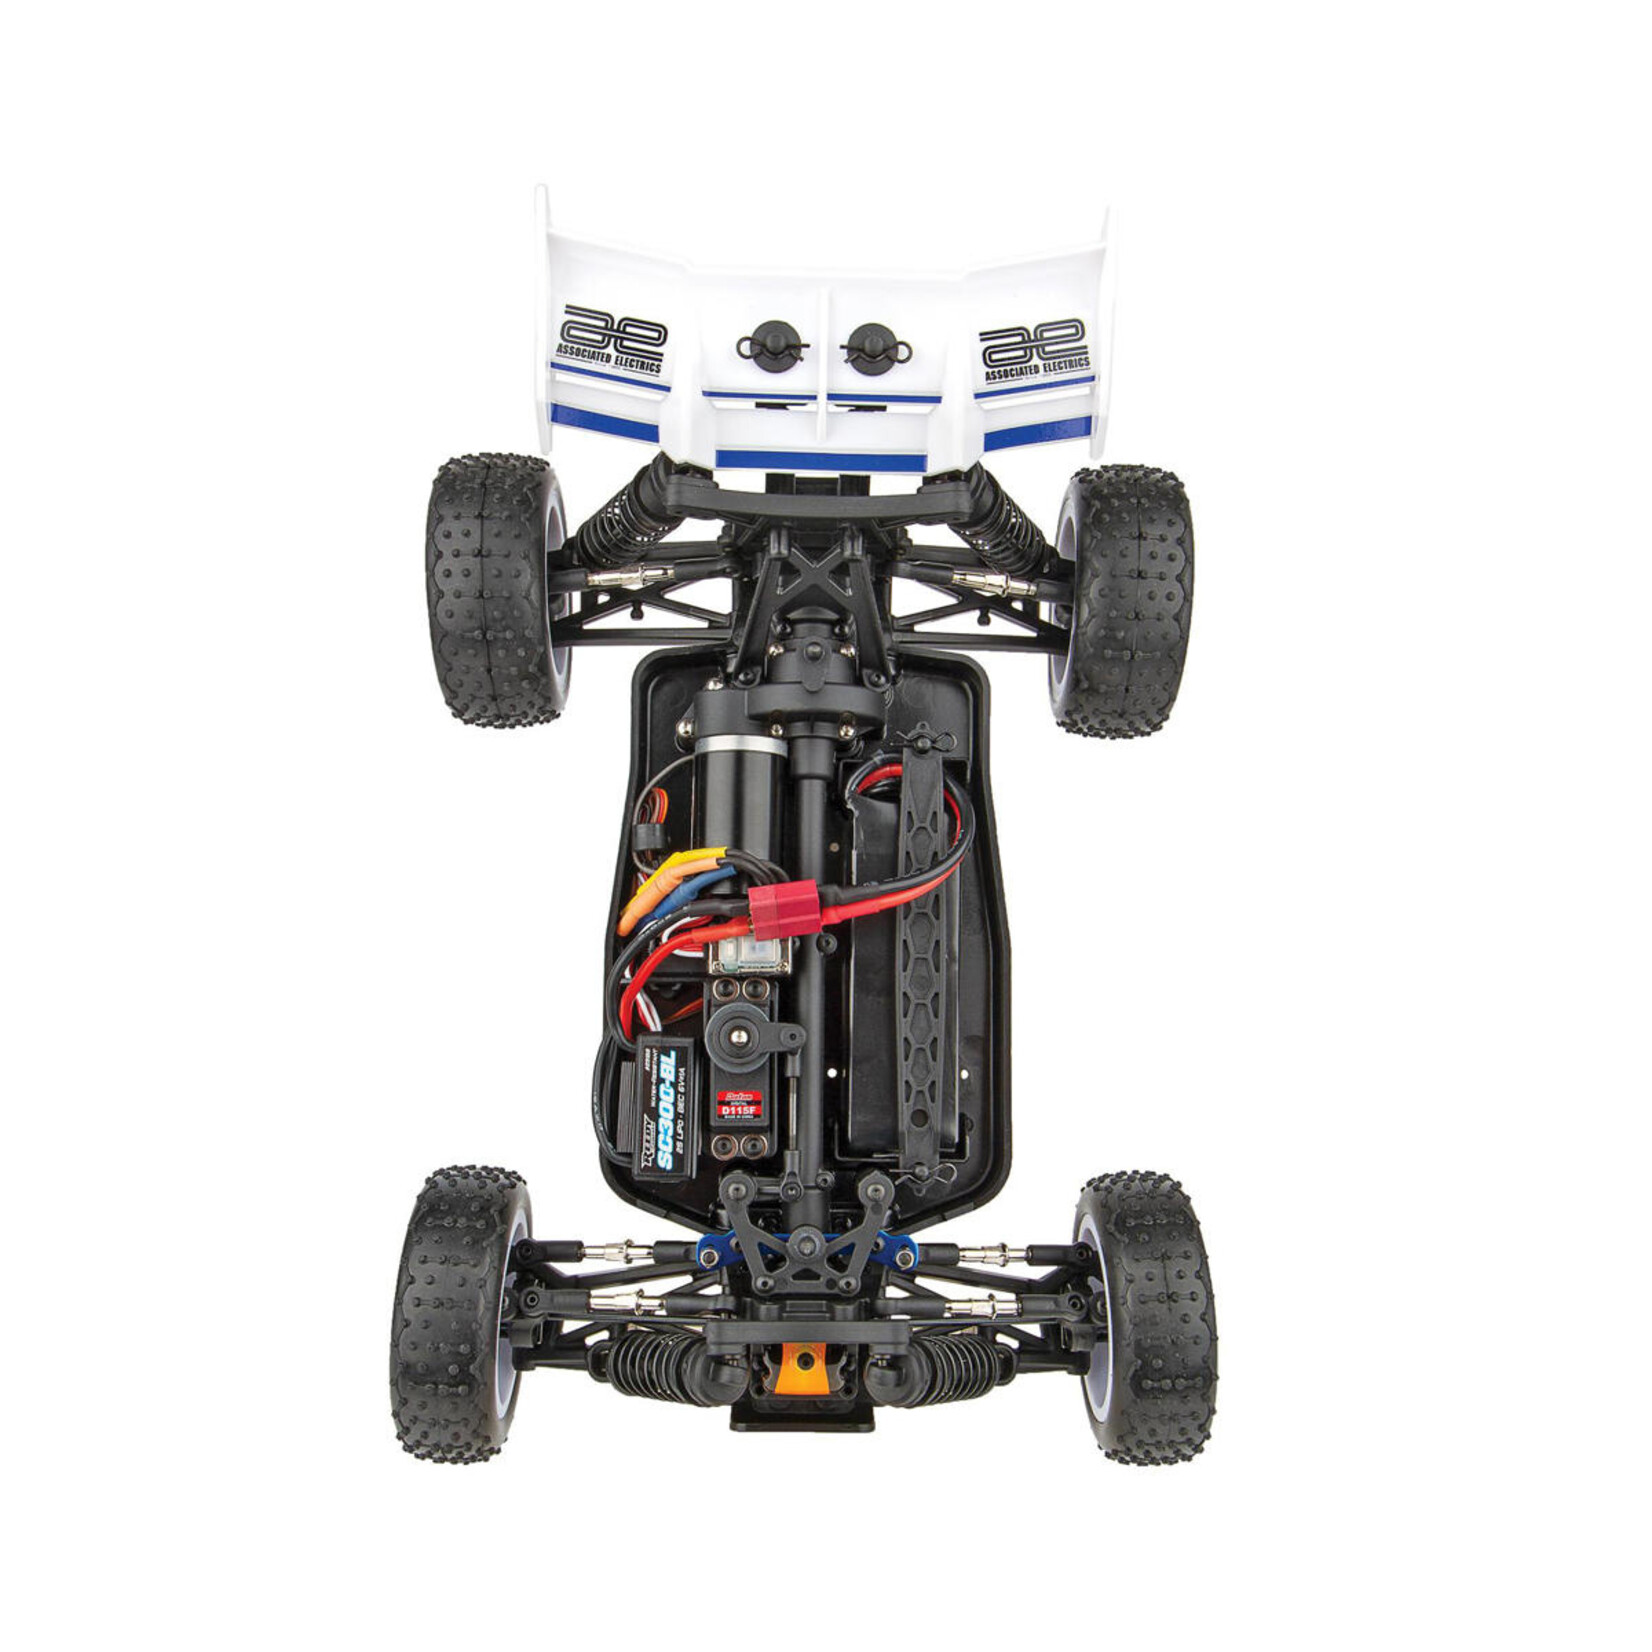 Team Associated Team Associated Reflex 14B Ongaro RTR 1/14 4WD Electric Buggy Combo w/2.4GHz Radio, Battery & Charger #20185C